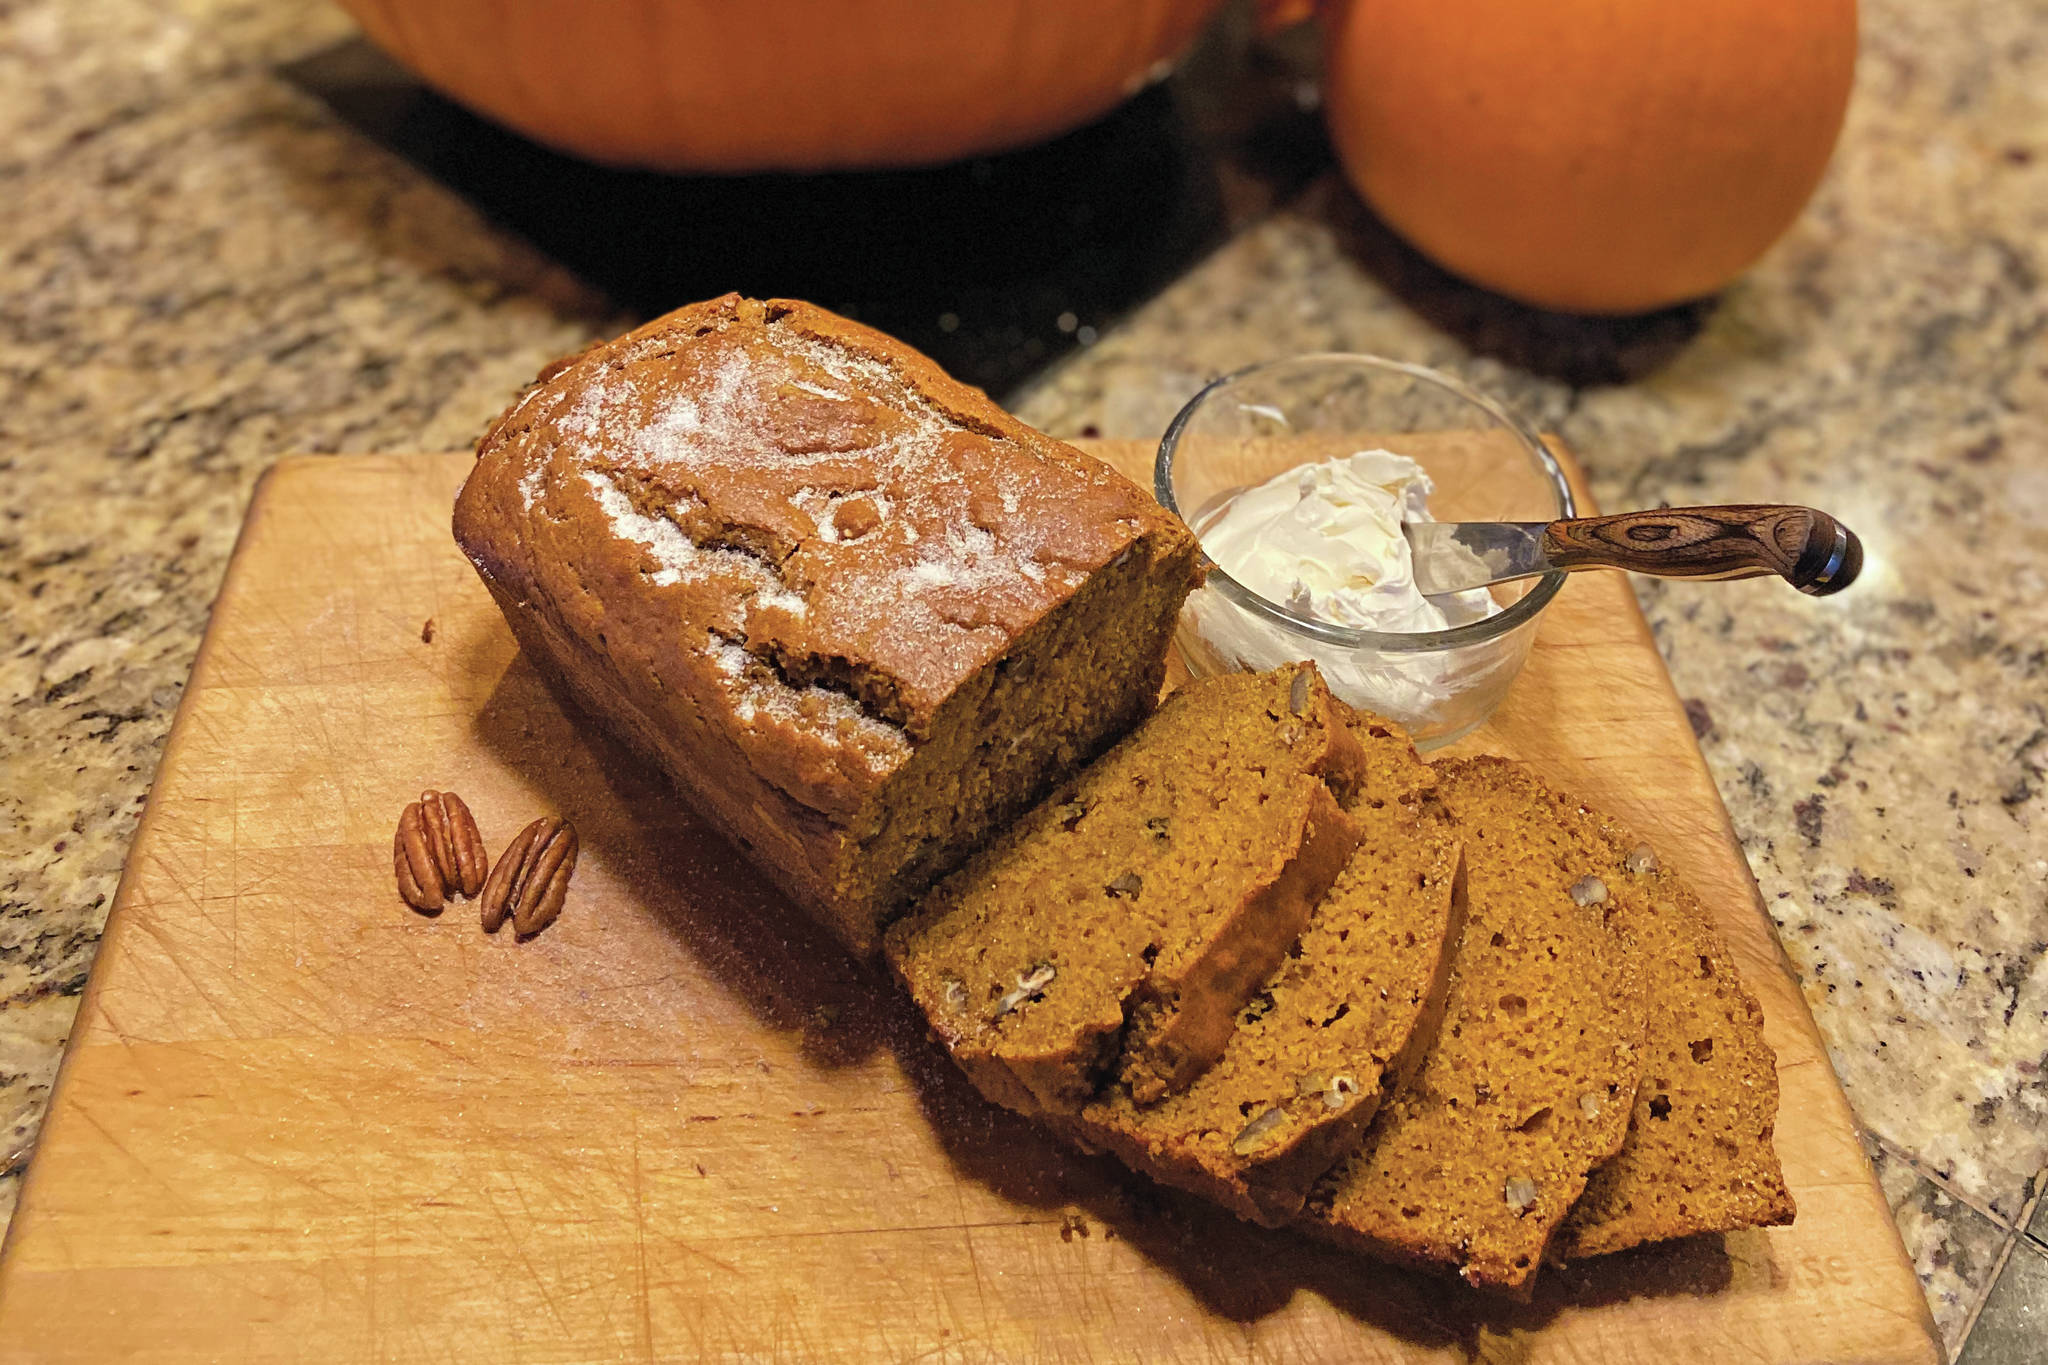 A little bit of pumpkin butter is the perfect complement to Teri Robl’s pumpkin bread, as in here in her kitchen on Oct. 29, 2019, in Homer, Alaska. (Photo by Teri Robl)